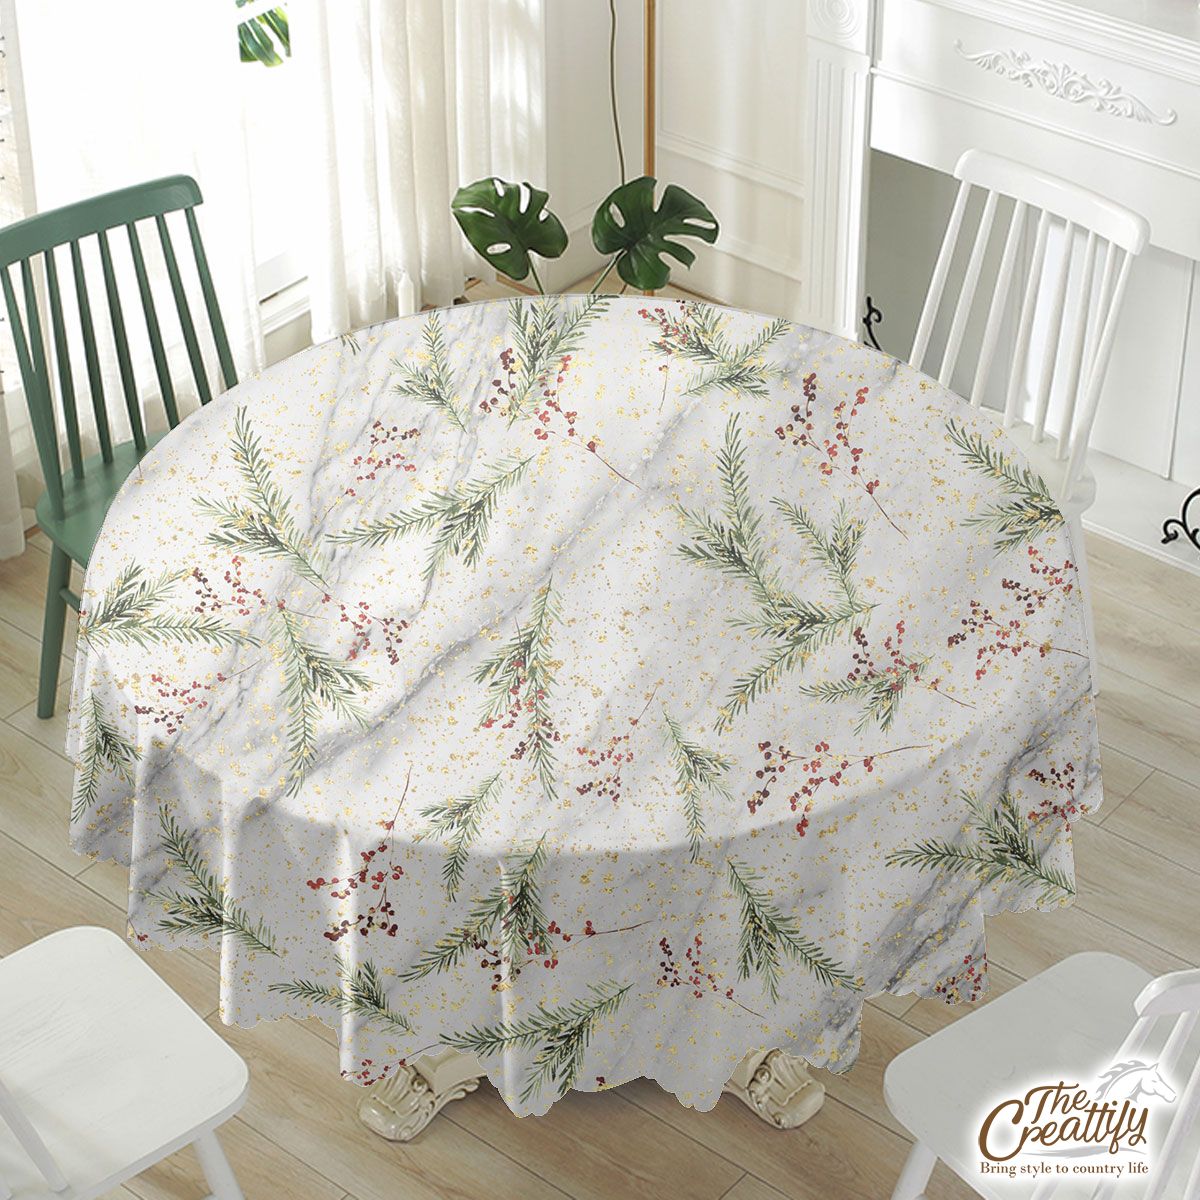 Red Berries With Pine Twig Pattern Waterproof Tablecloth